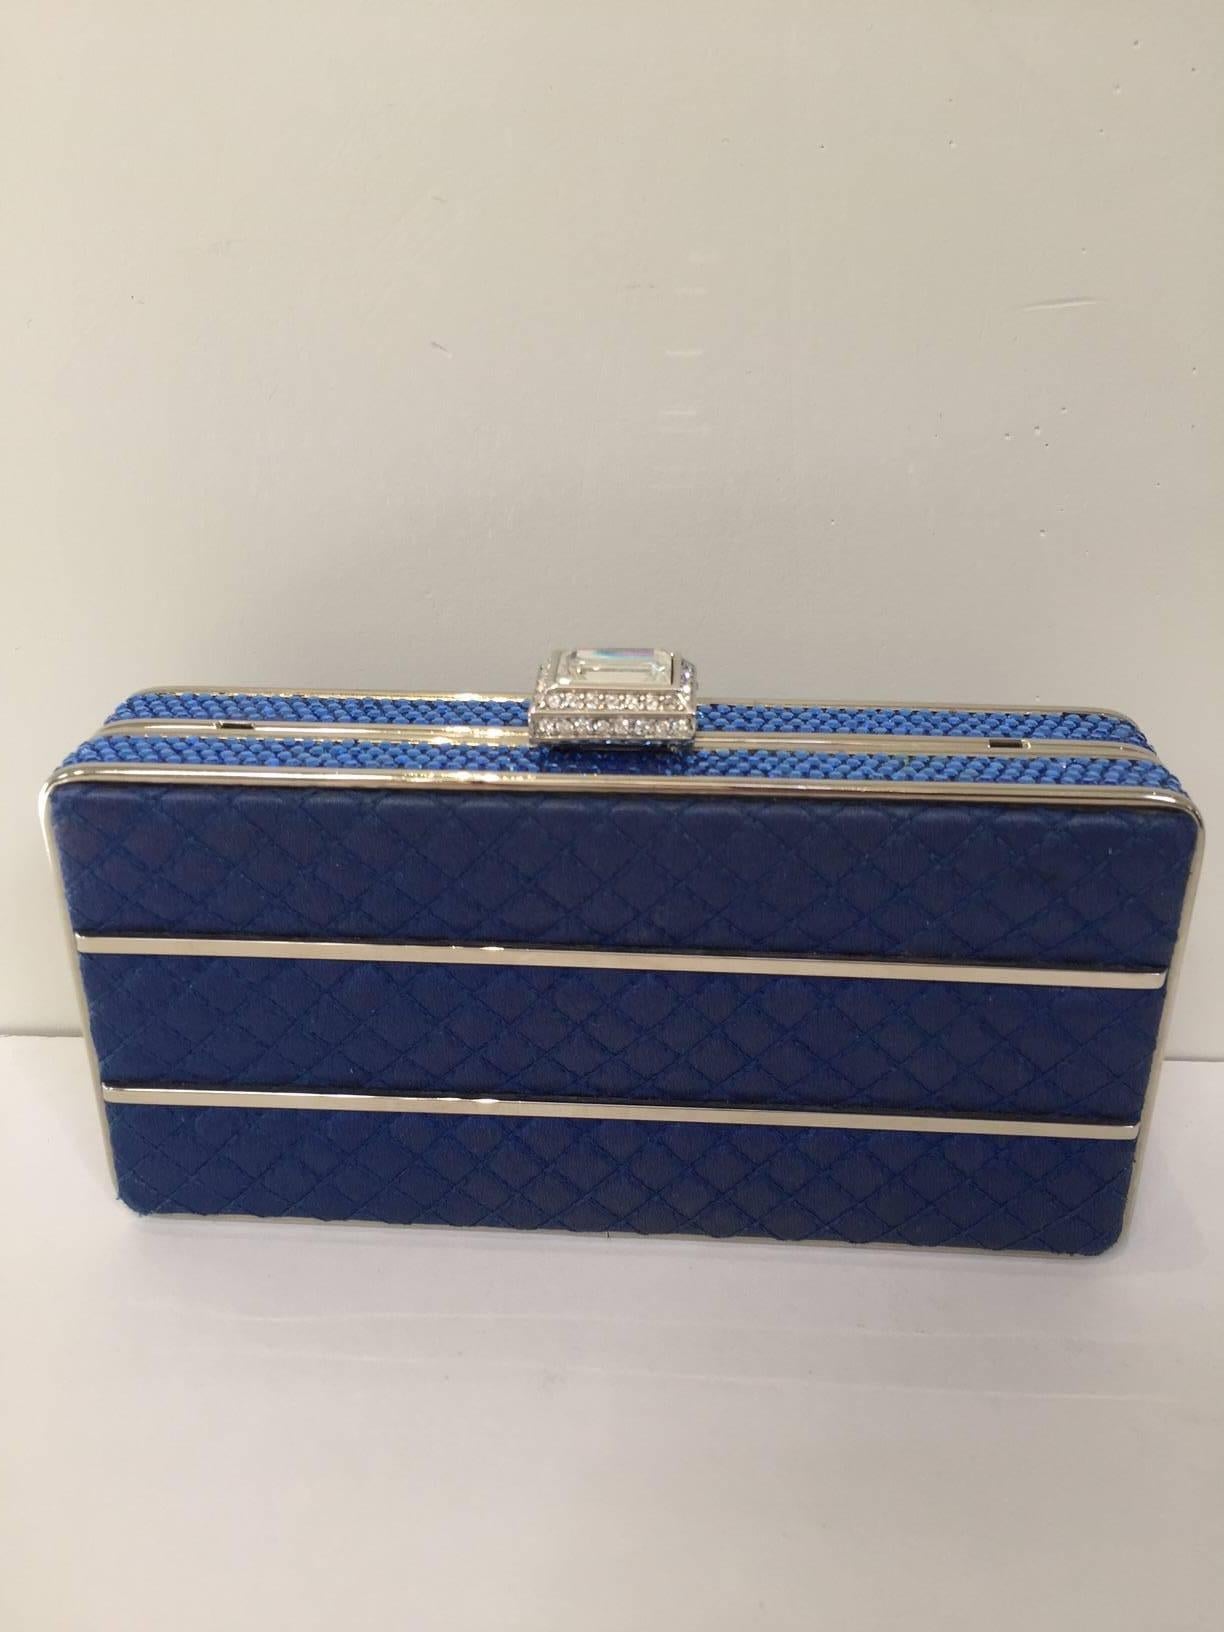 Judith Leiber evening blue satin clutch with rhinestones and strap.